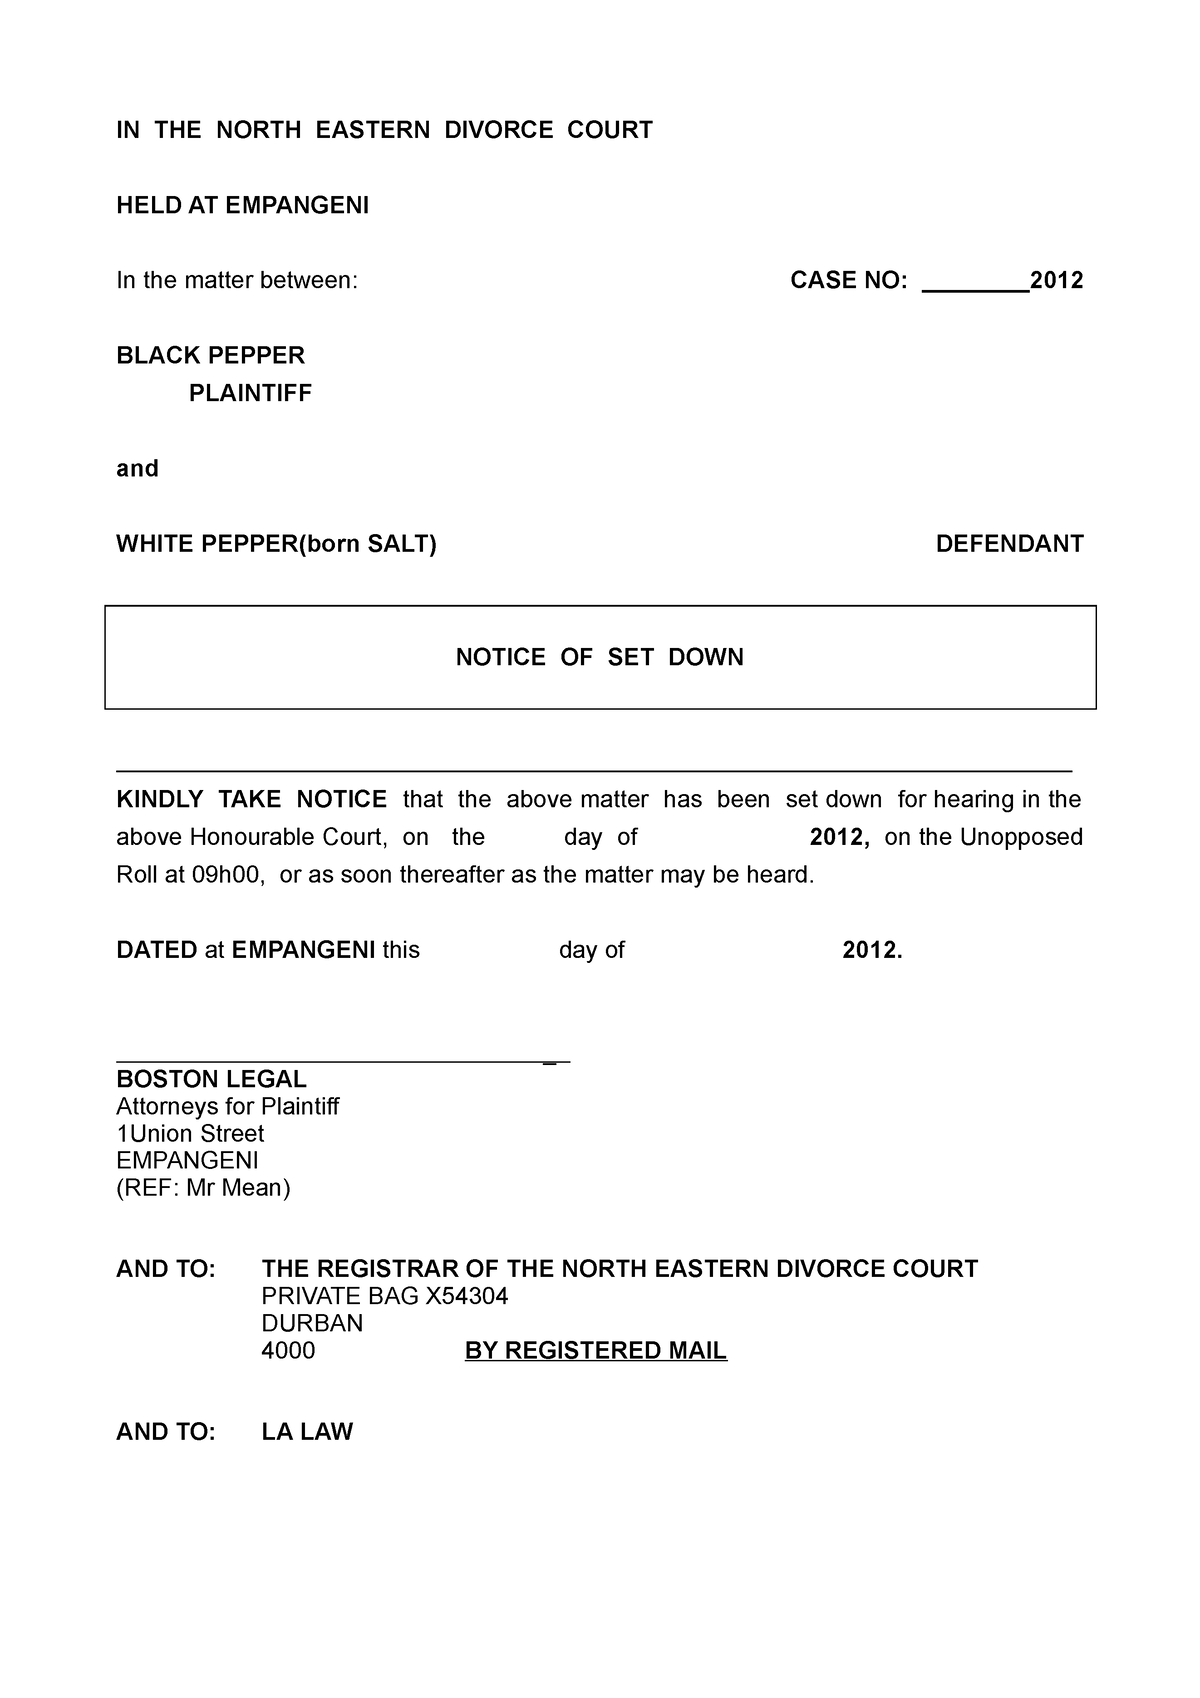 Notice of Set Down rules of the court IN THE NORTH EASTERN DIVORCE